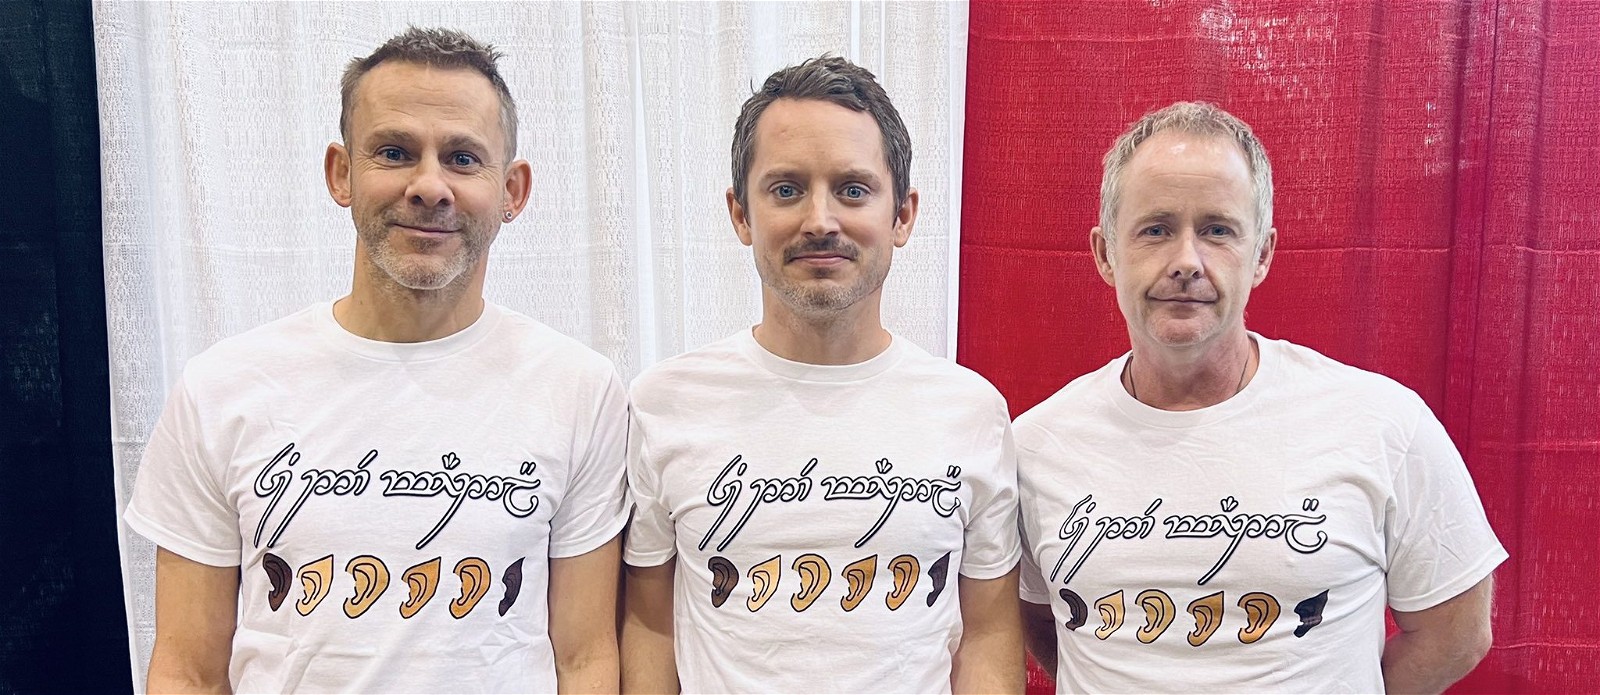 Dominic Monaghan, Elijah Wood, and Billy Boyd show support to The Rings of Power cast